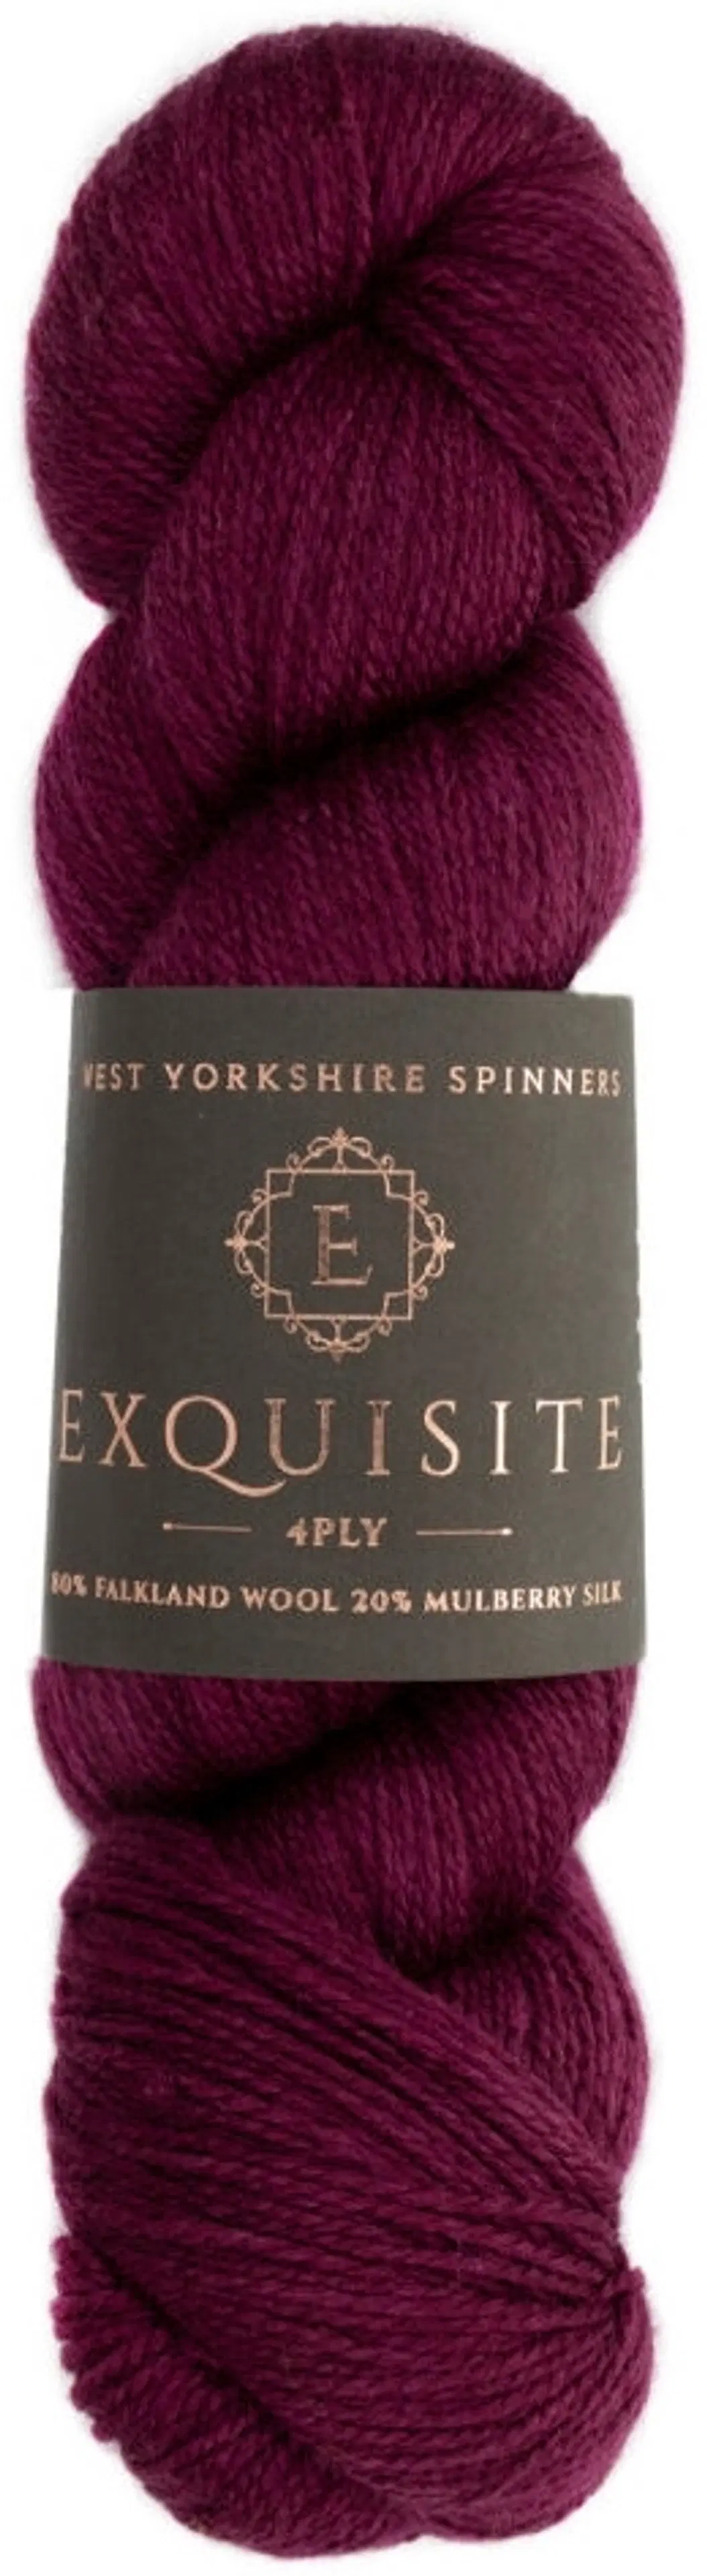 West Yorkshire Spinners lanka Exquisite 4PLY 100g Bordeaux 558